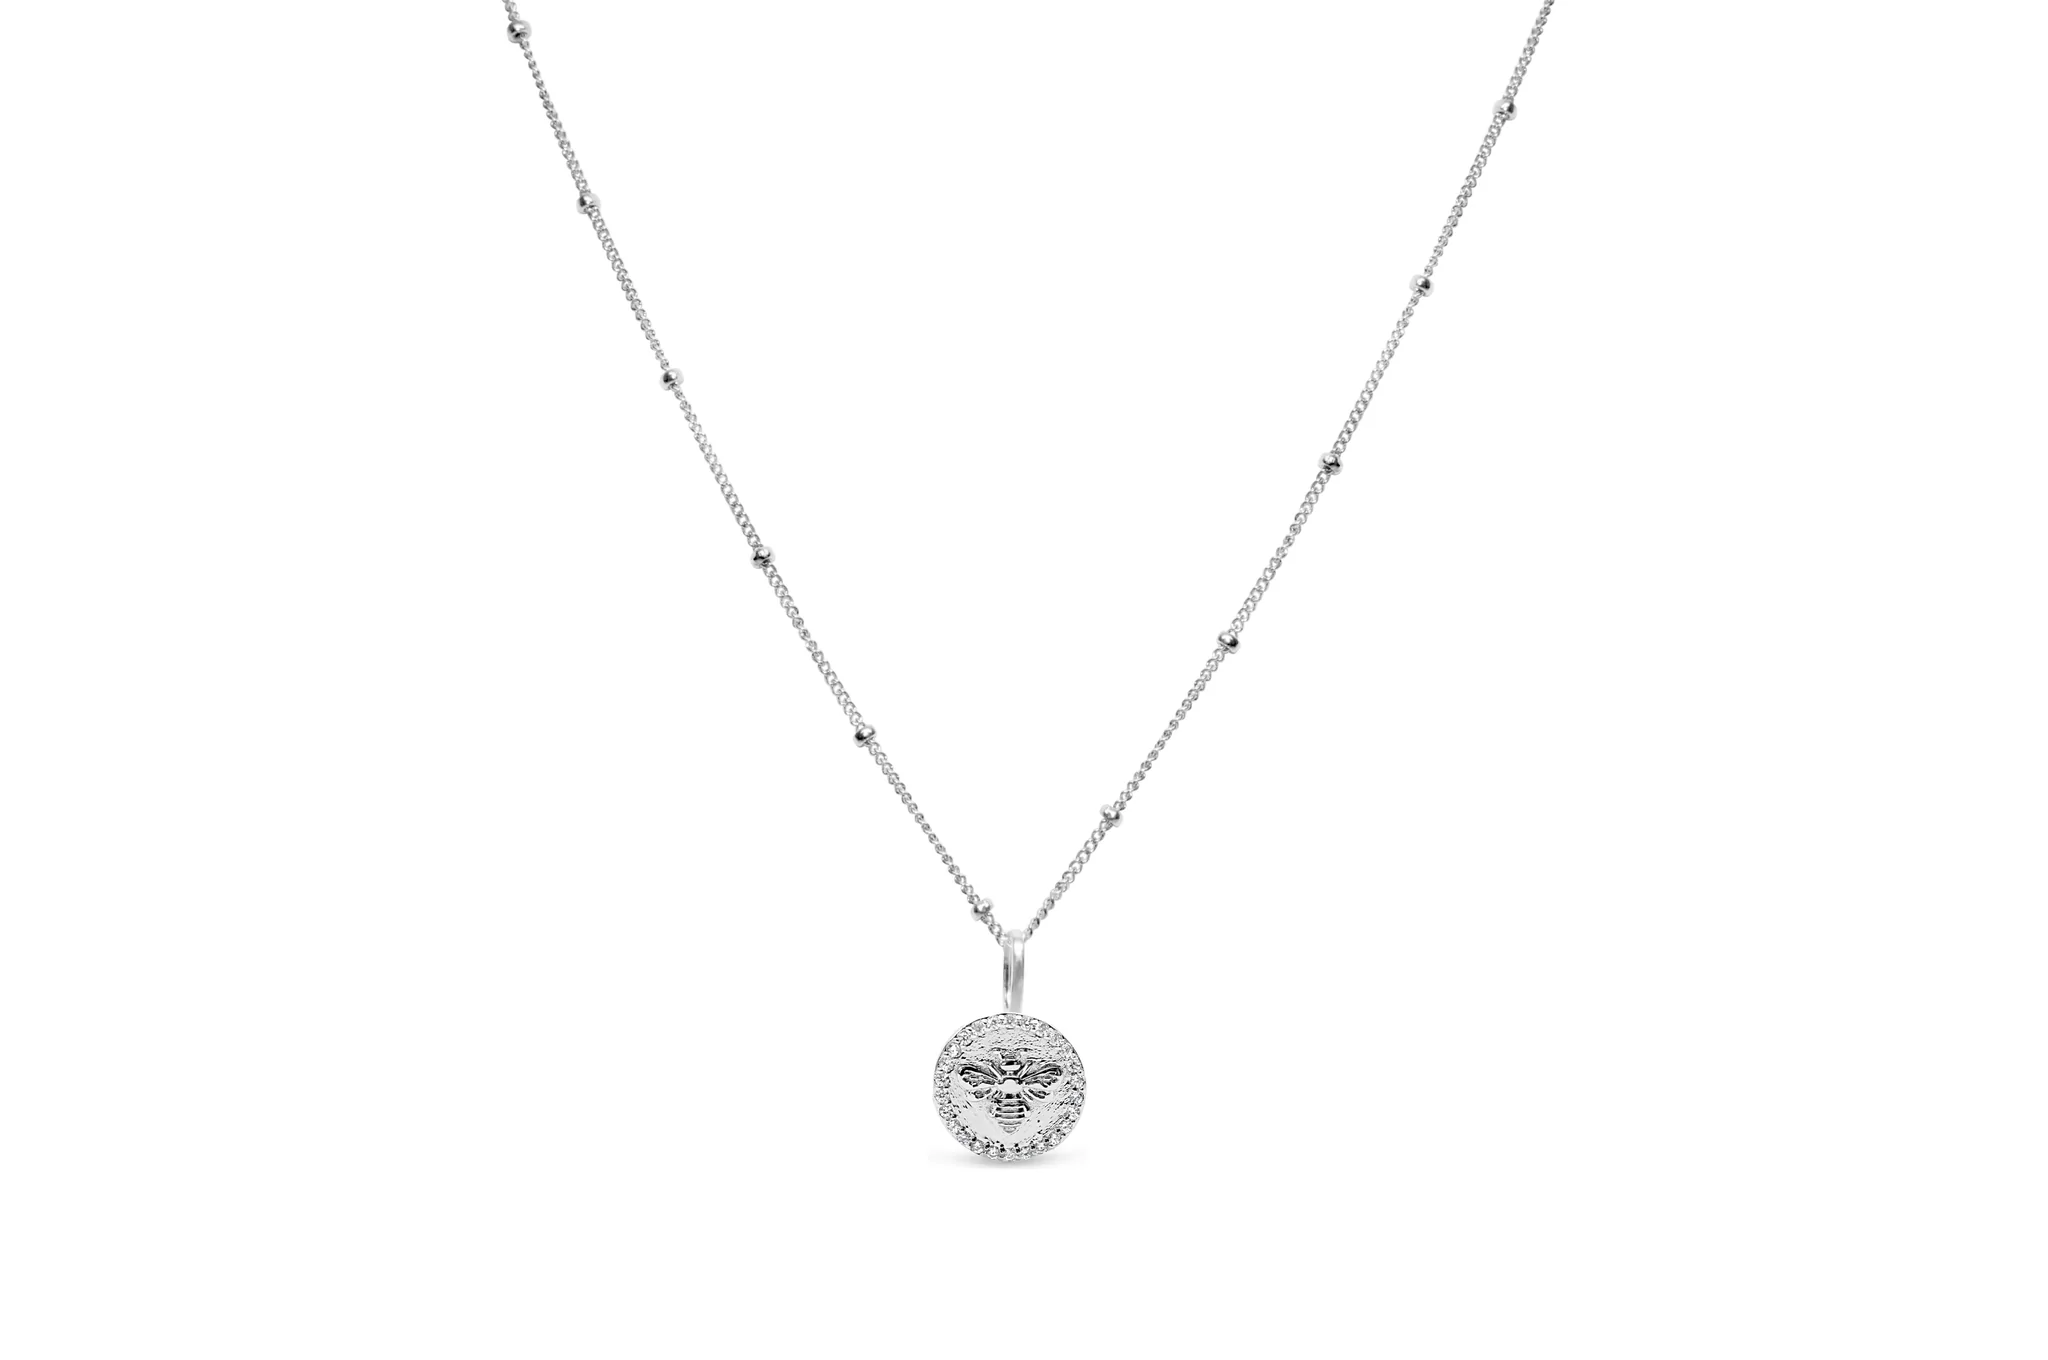 Iconic Charm Chain Necklace